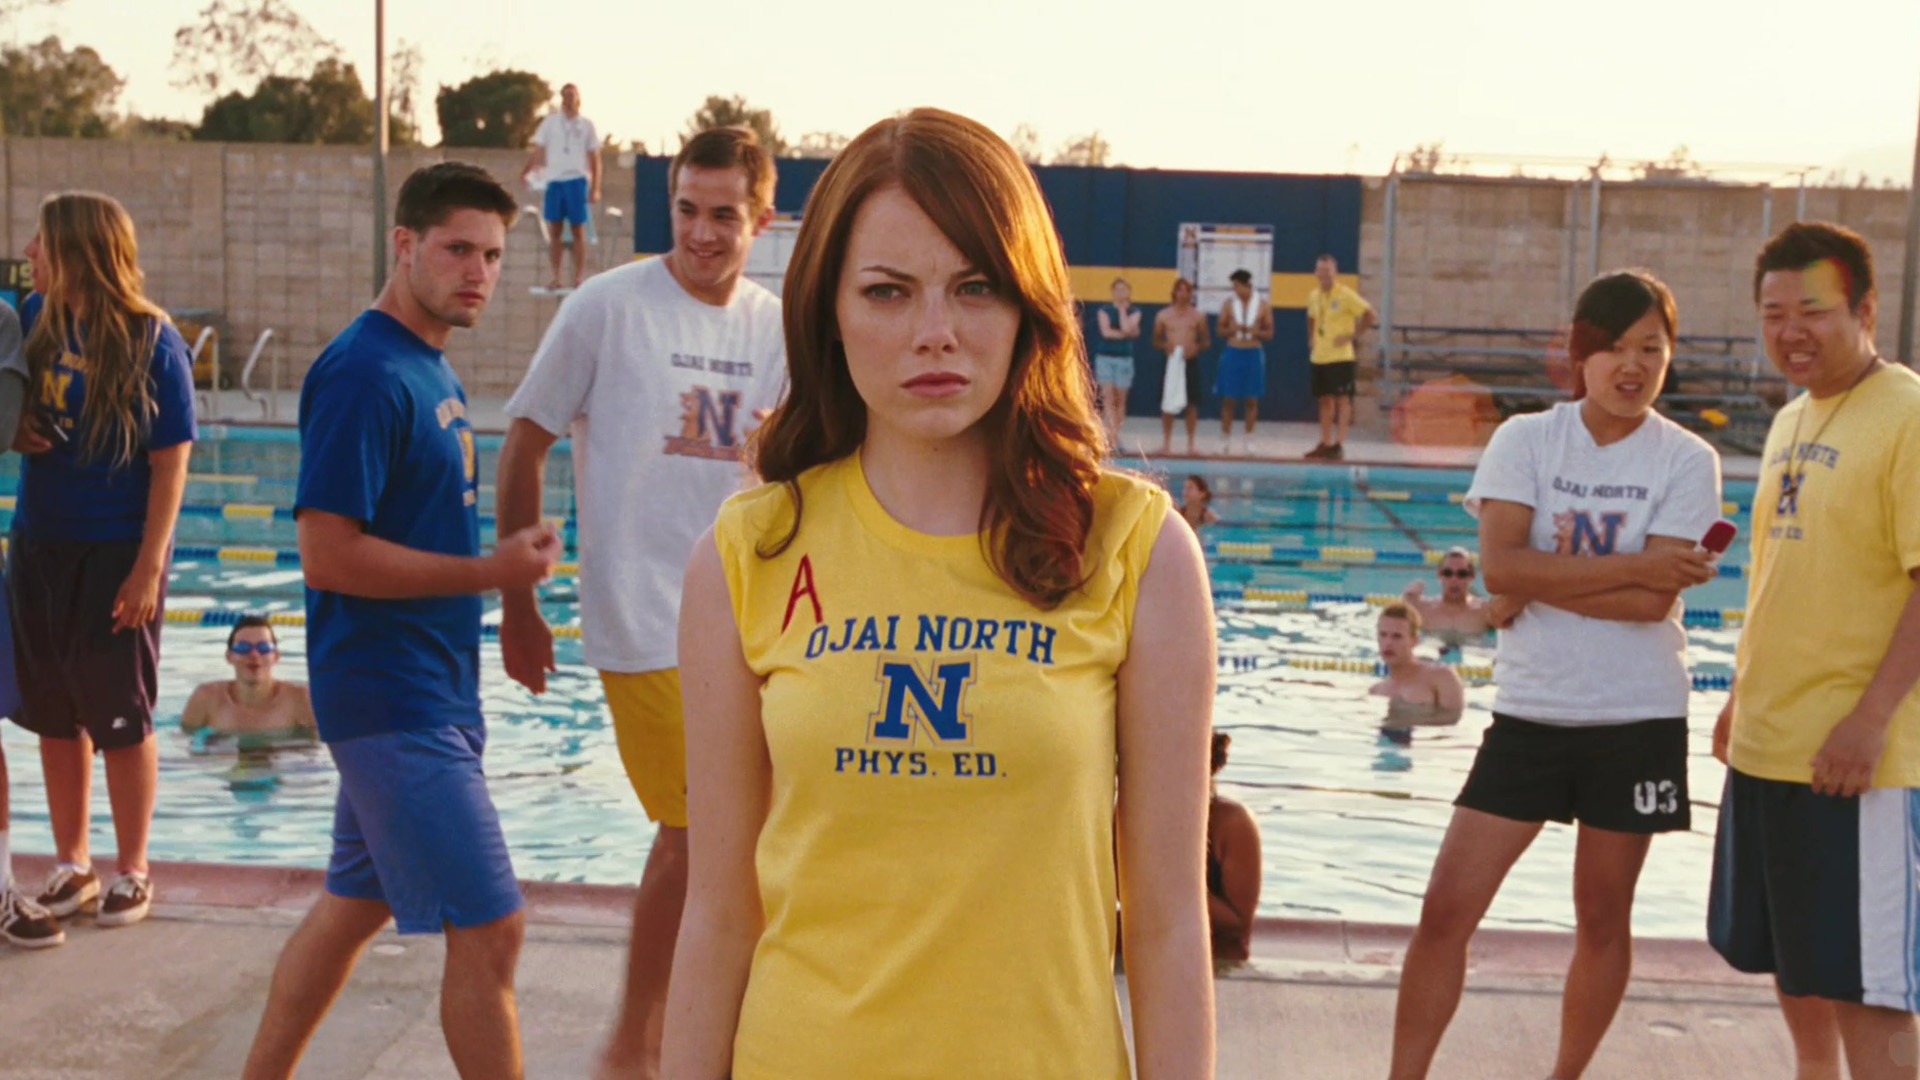 Easy A #4